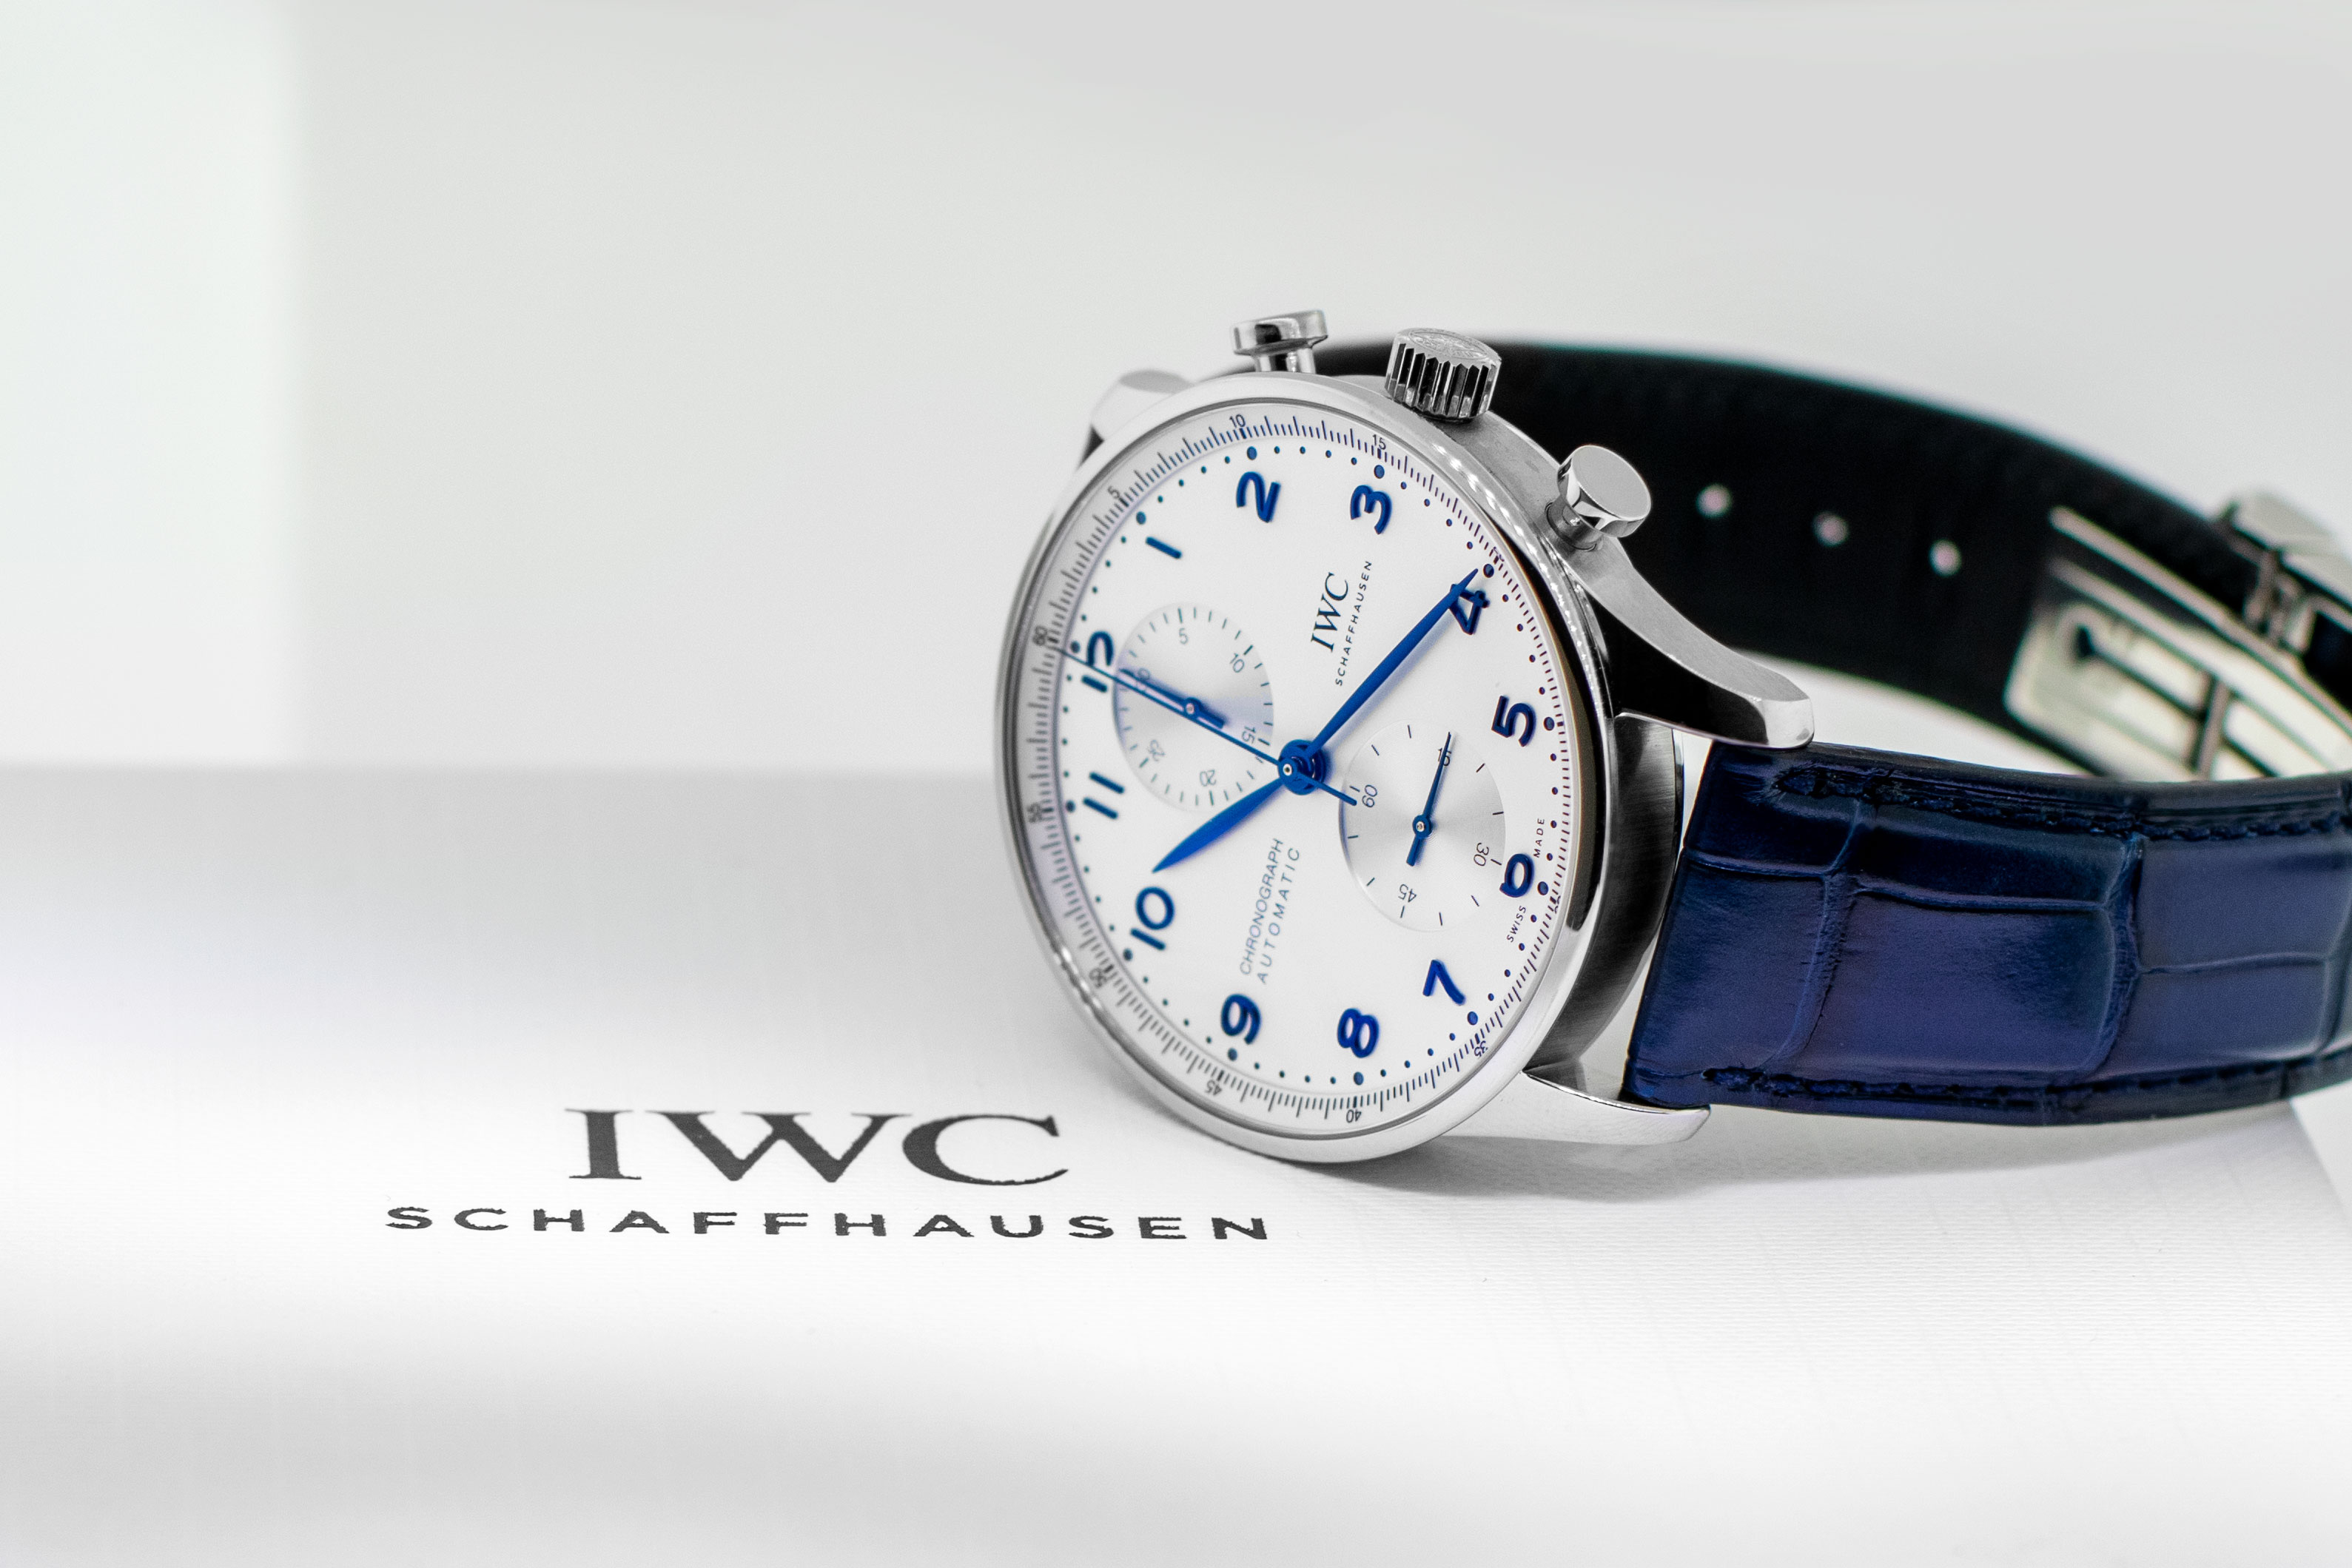 IWC Portugieser product watch Photography